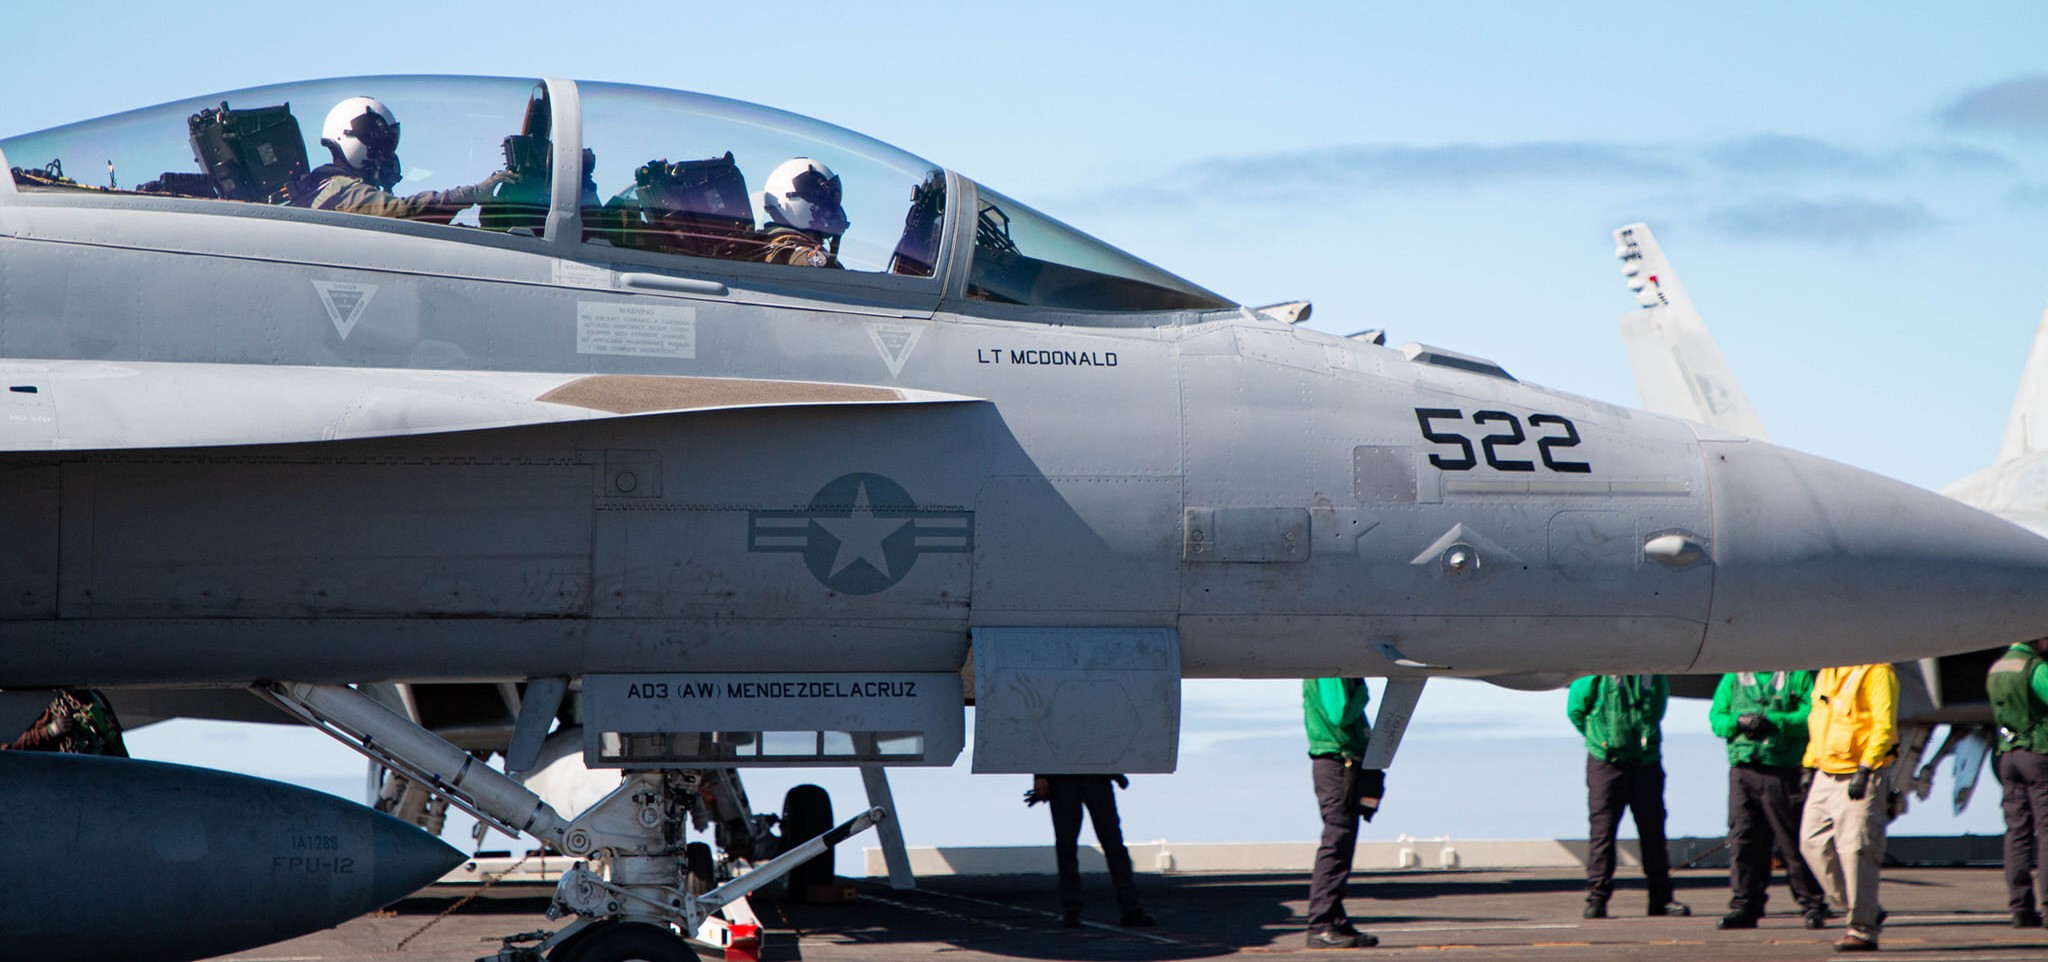 vaq-129 vikings electronic attack squadron fleet replacement frs us navy ea-18g growler 18 cvn-71 uss theodore roosevelt